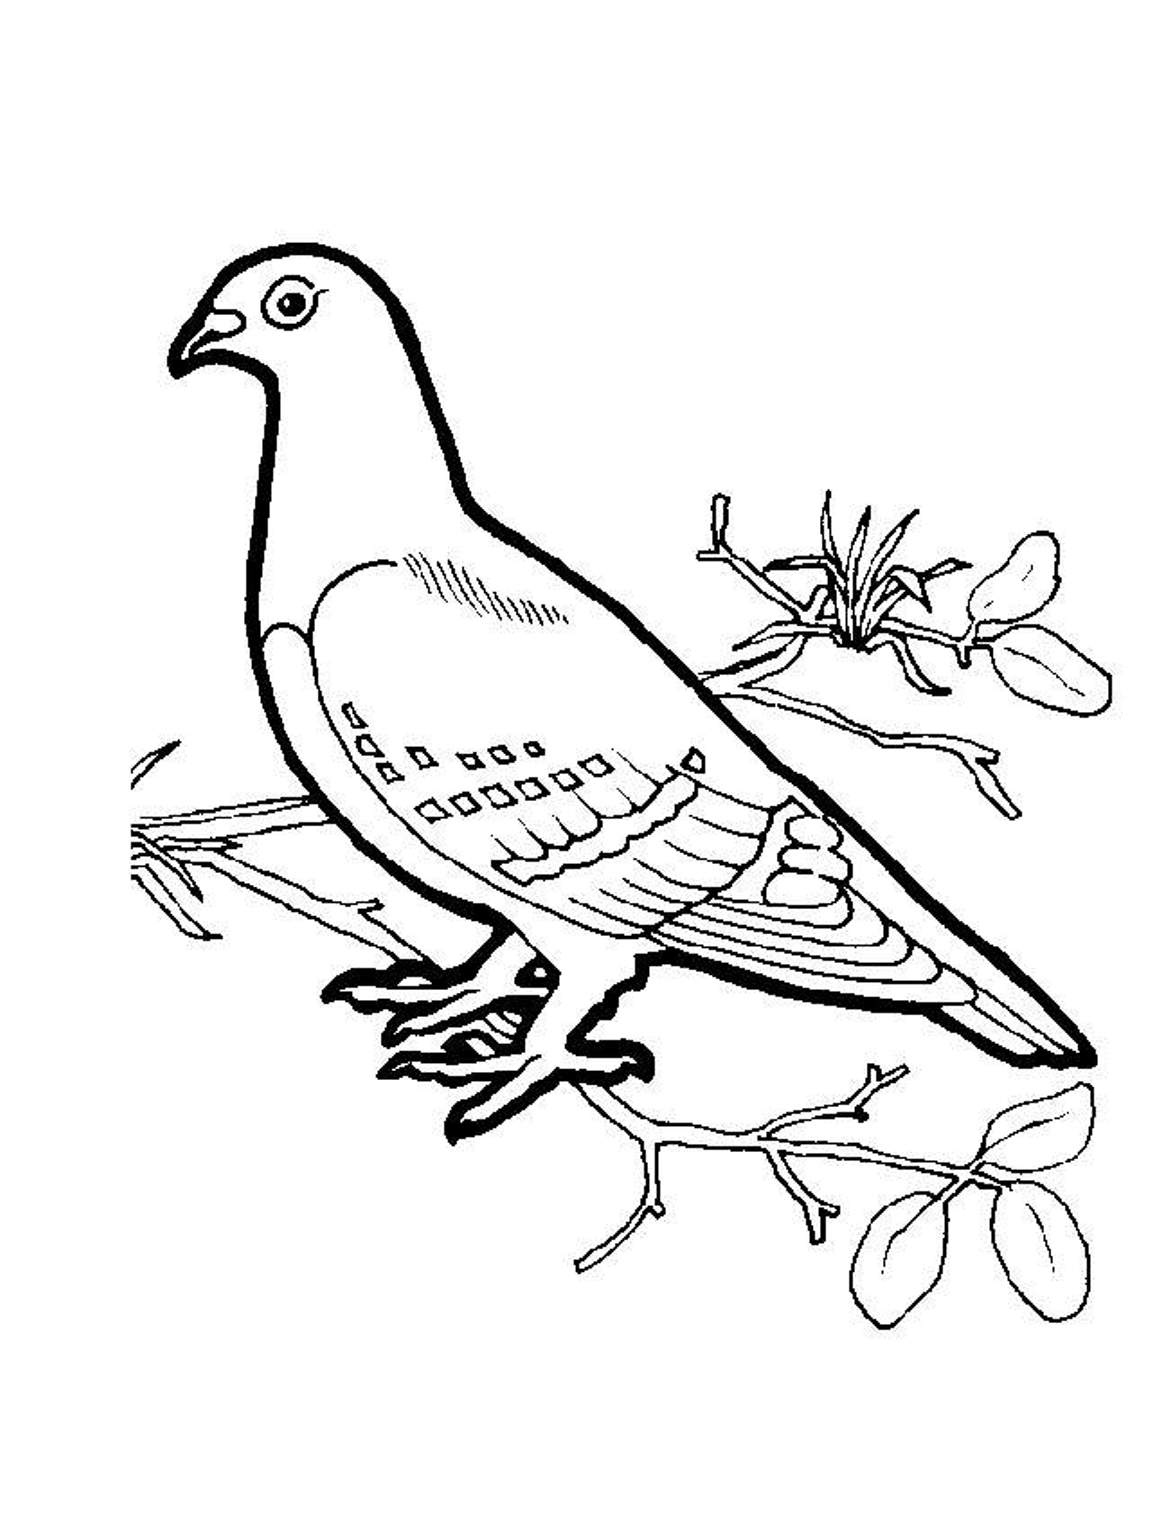 White Dove Coloring Page - Coloring Home